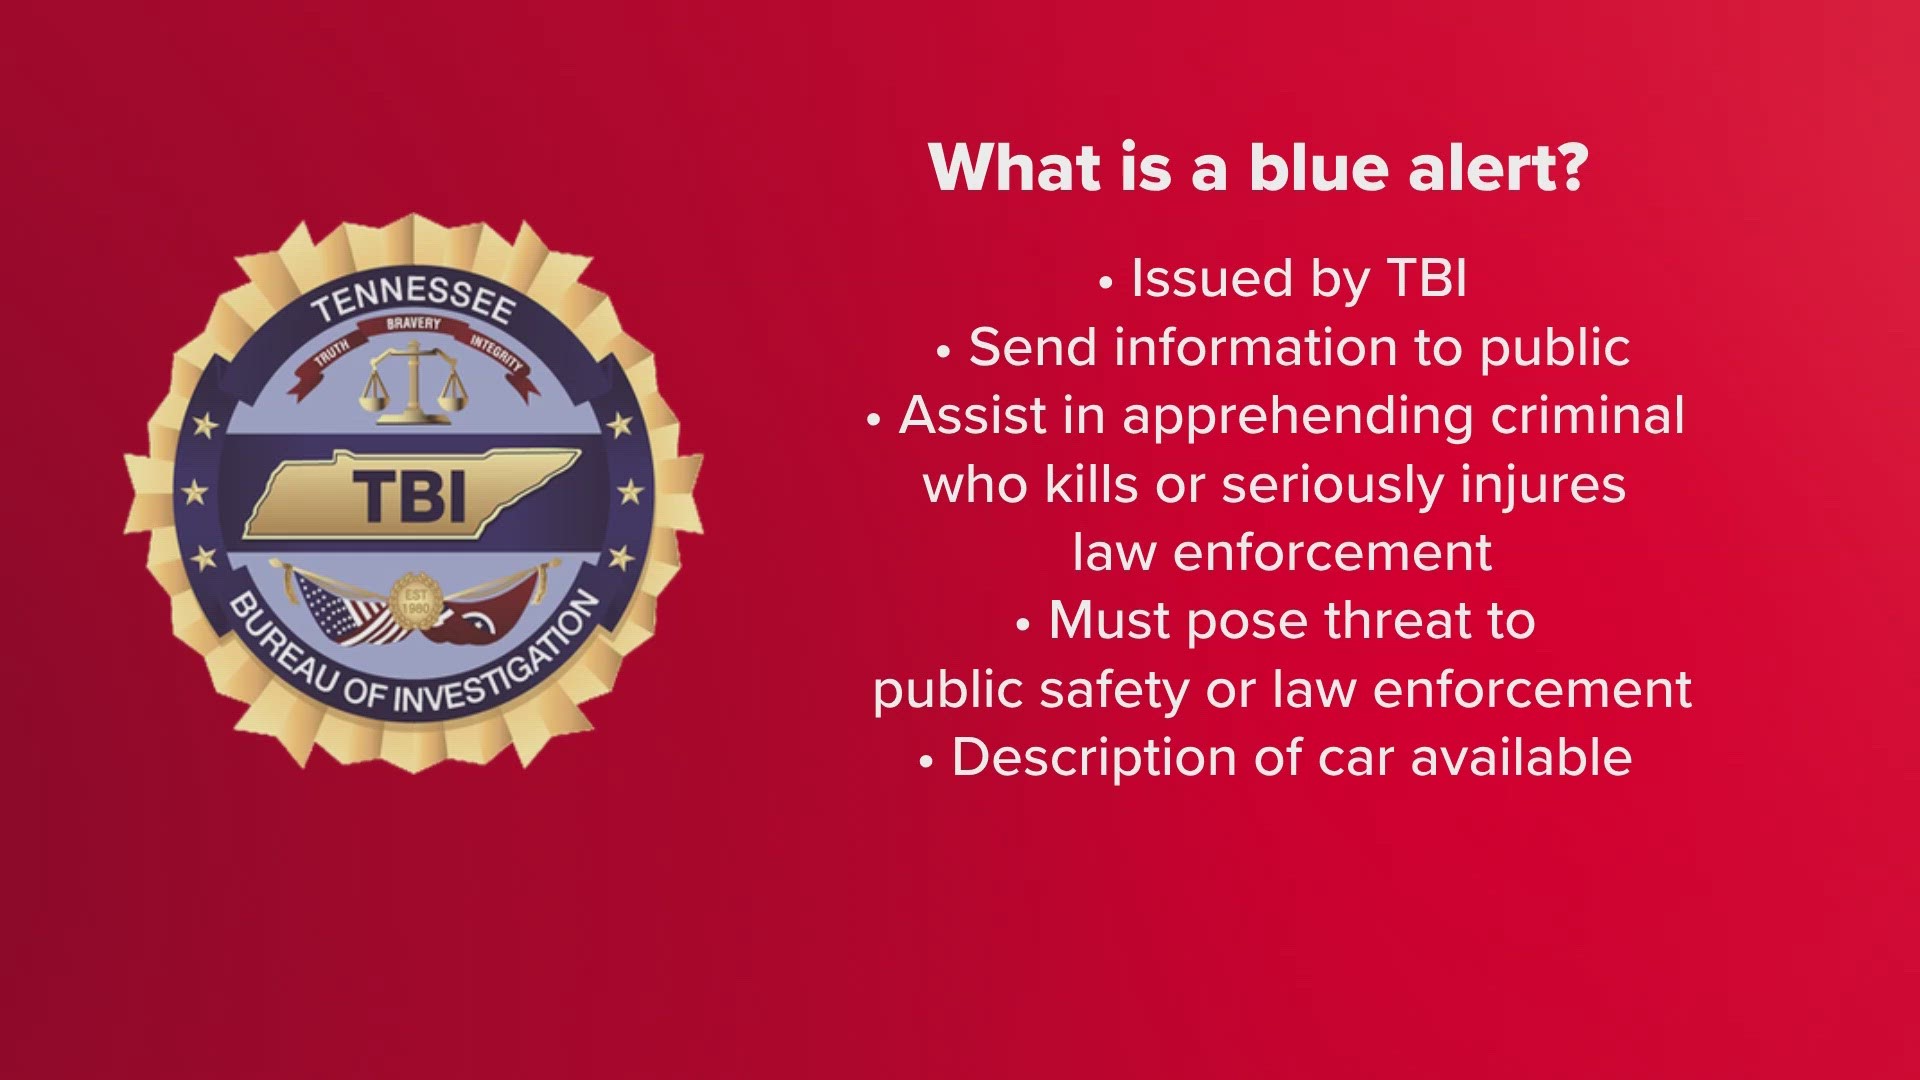 Blue Alerts are only issued when a law enforcement officer is killed and the suspect poses an imminent threat to public safety.